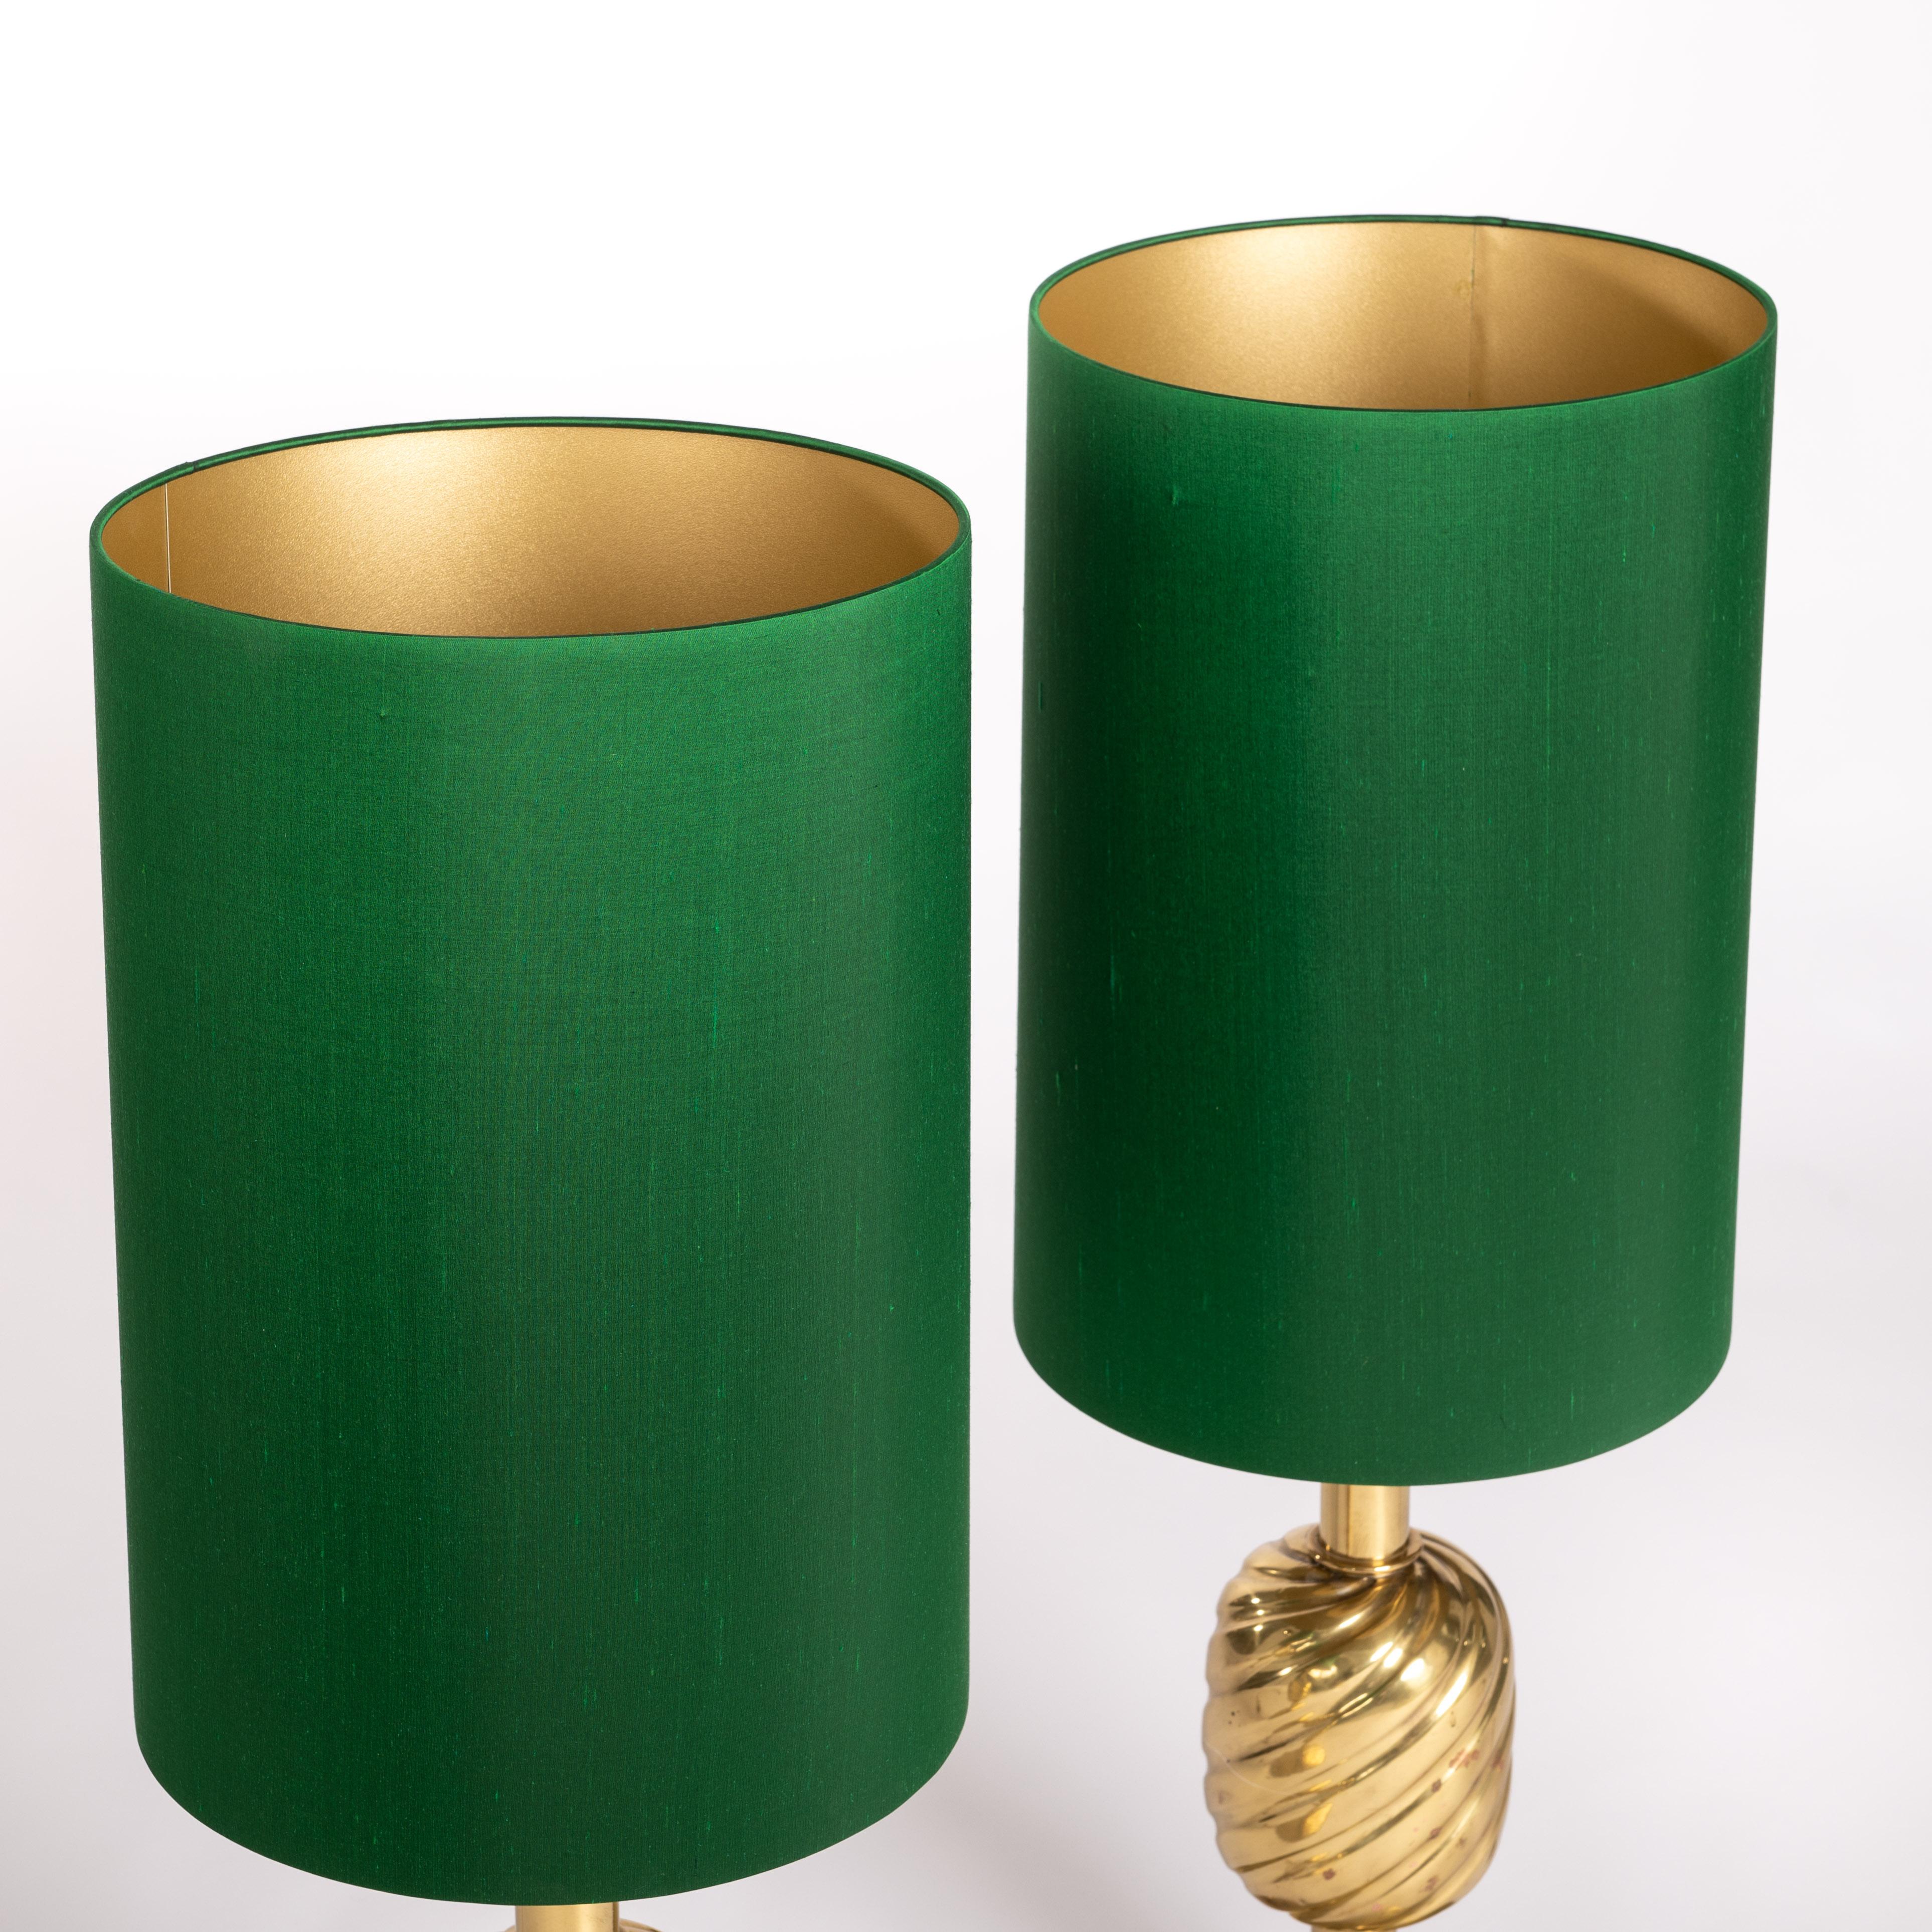 Italian mid-century solid brass pineapple table lamps with emerald green silk shades from the 70s.
Heavy brass table lamps in the shape of a pineapple. 
The foot batten is a bit overemphasized, the body is designed in a long style. 
The shades takes